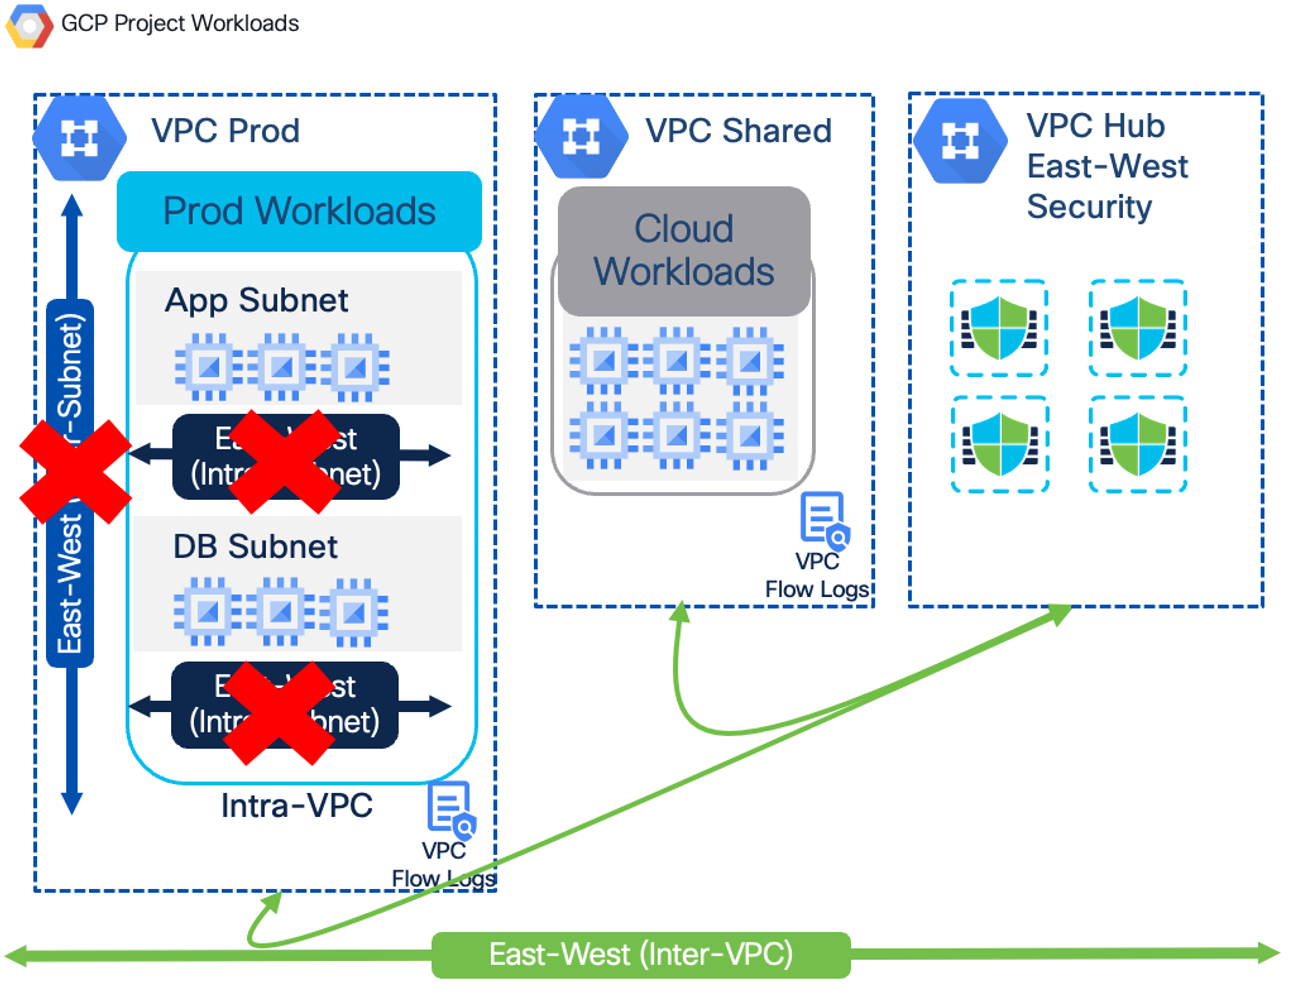 Figure 25: Network Microsegmentation for Cloud Agentless Workloads With Centralized/Hub VPC Secure Firewall Deployment on GCP